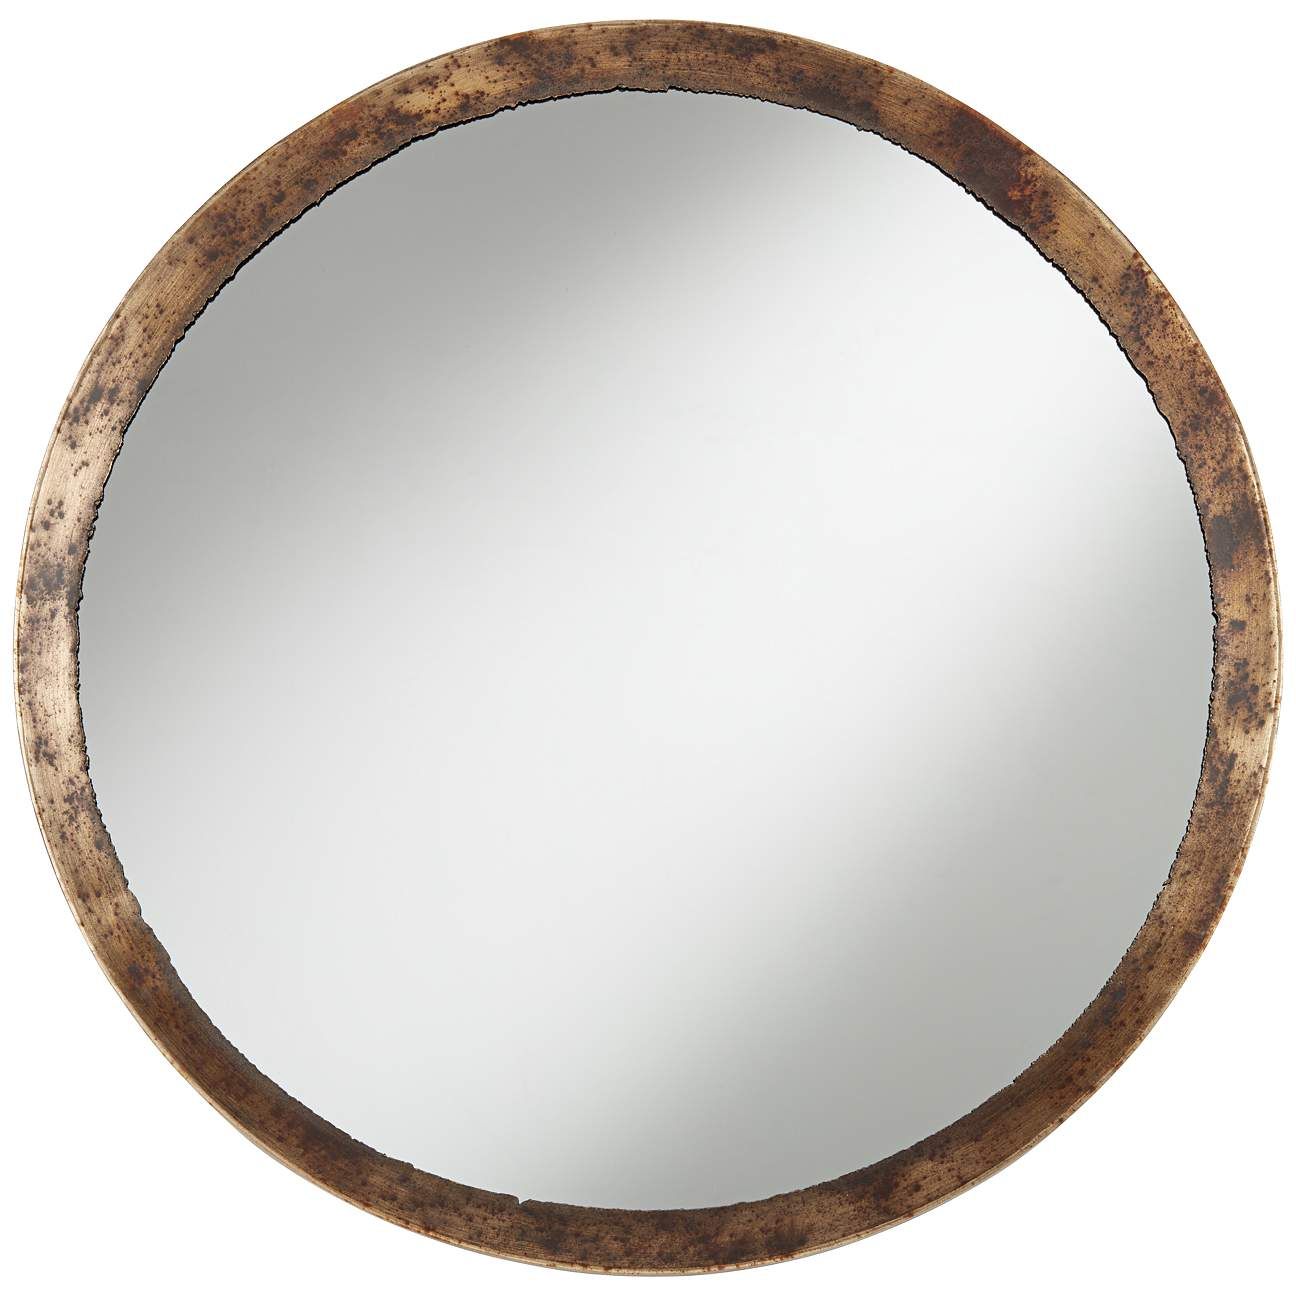 Uttermost Tortin Jagged Edge 34" Round Wall Mirror | Lamps Plus